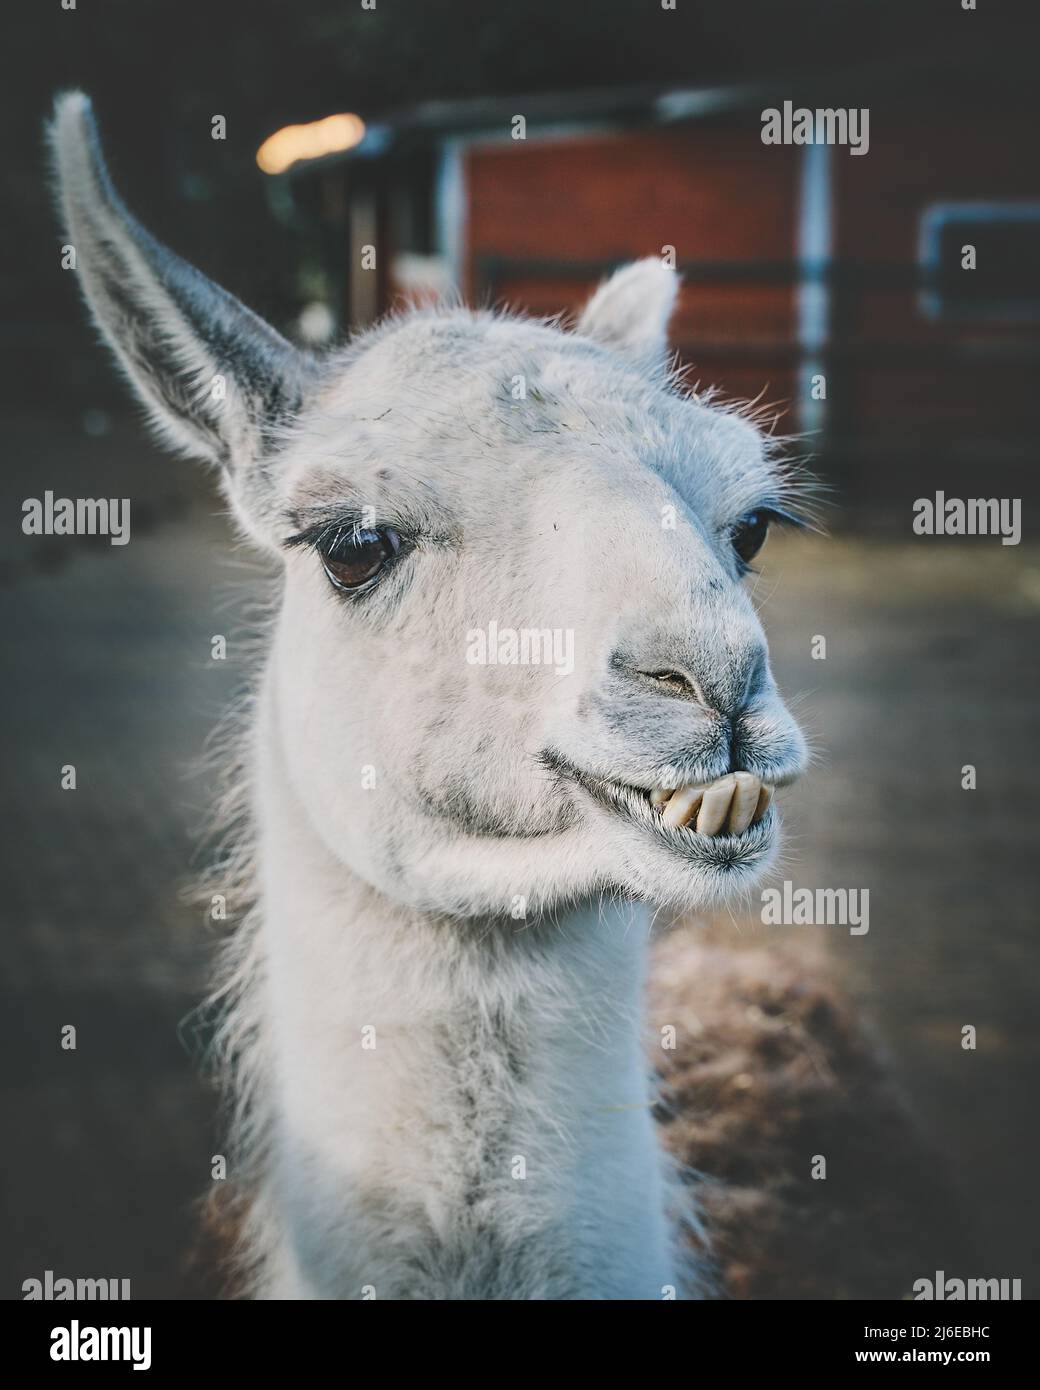 Friendly and Silly Lama in a Sanctuary. High quality photo Stock Photo